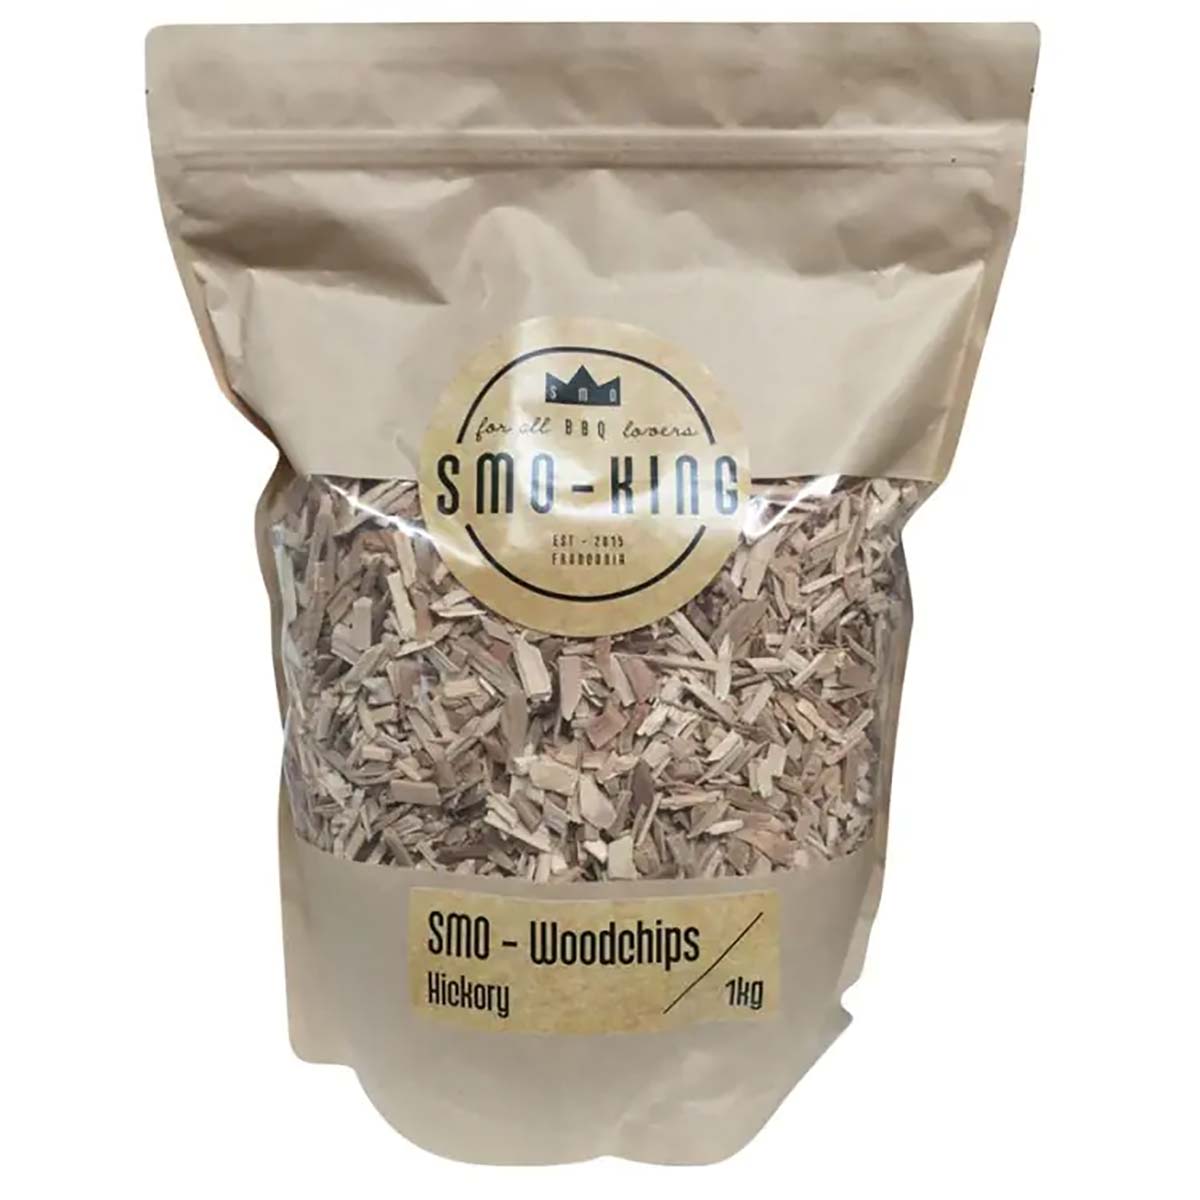 Smo-King-Smo-Woodchips Hickory 1kg